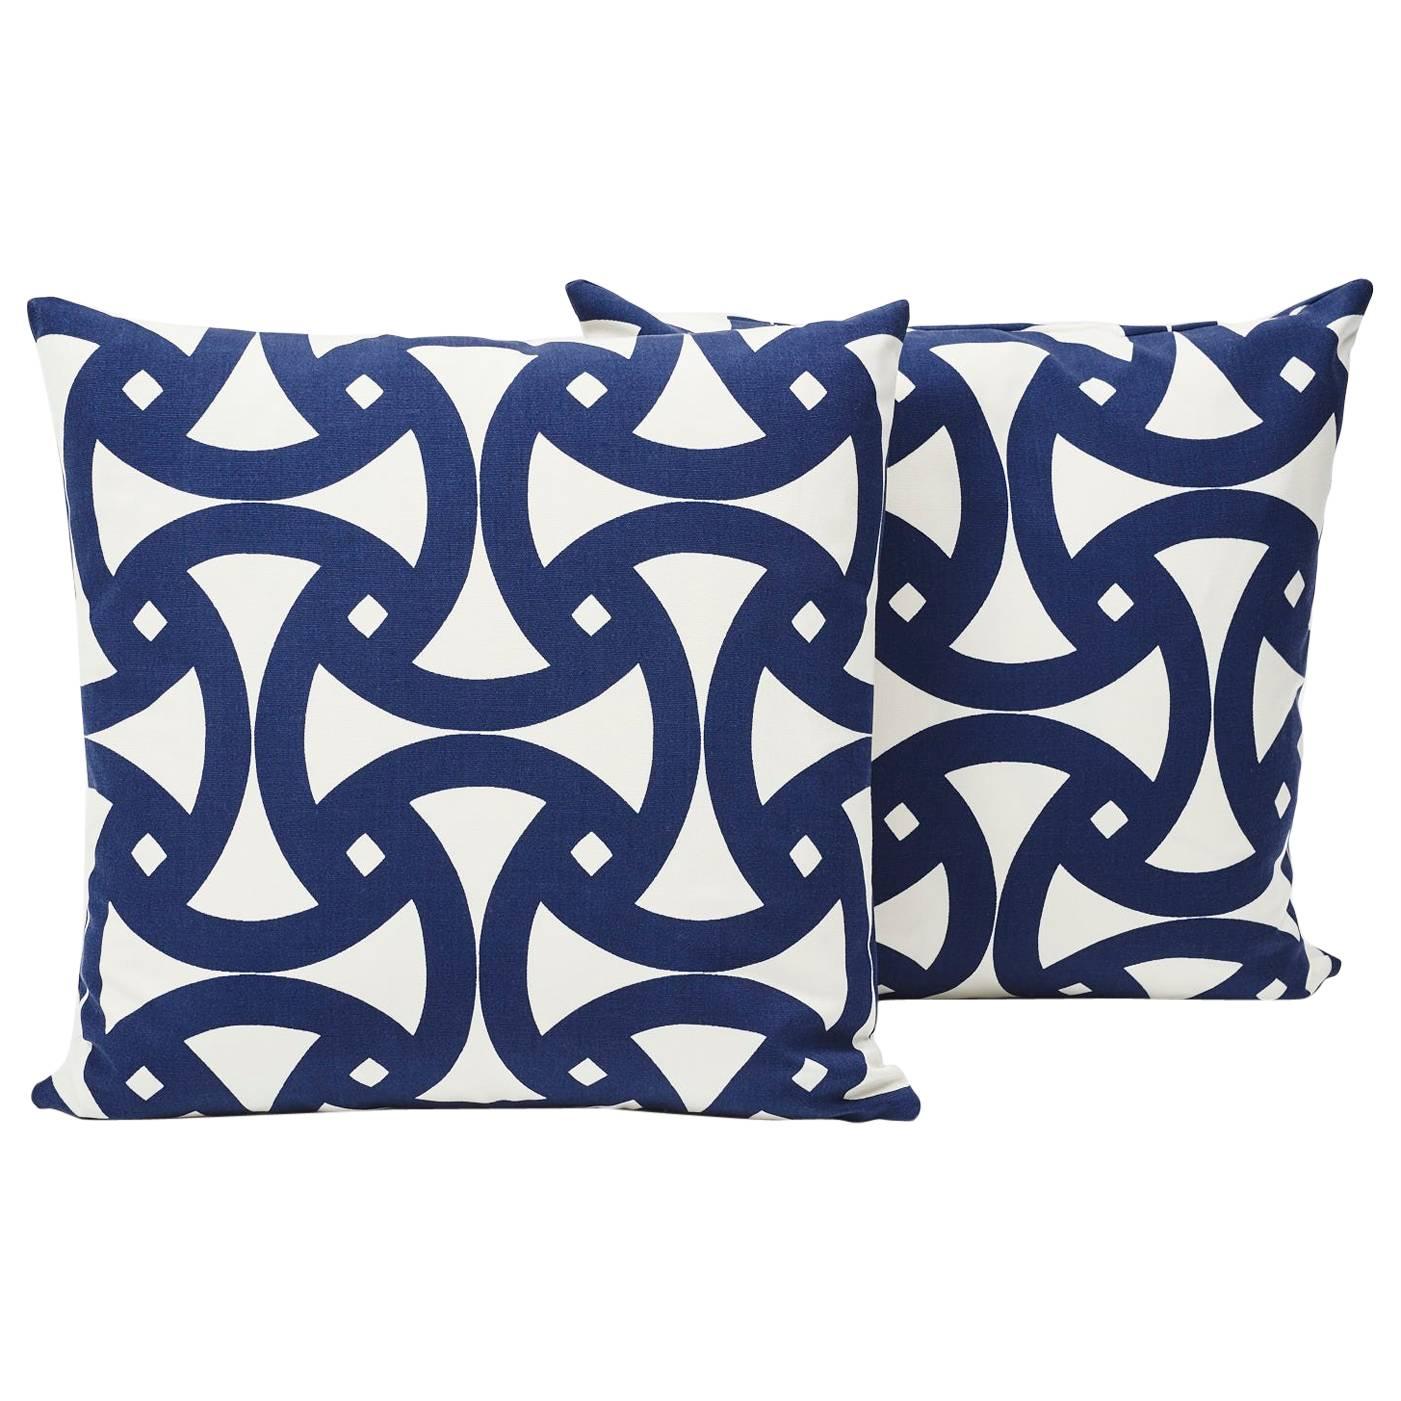 This marine blue geometric print, filled with interlocking curves, has a bold flair sure to heighten any setting! Made from 100% acrylic duck, this Schumacher Santorini print pillow is great for both indoor and outdoor use.   

*If out of stock,